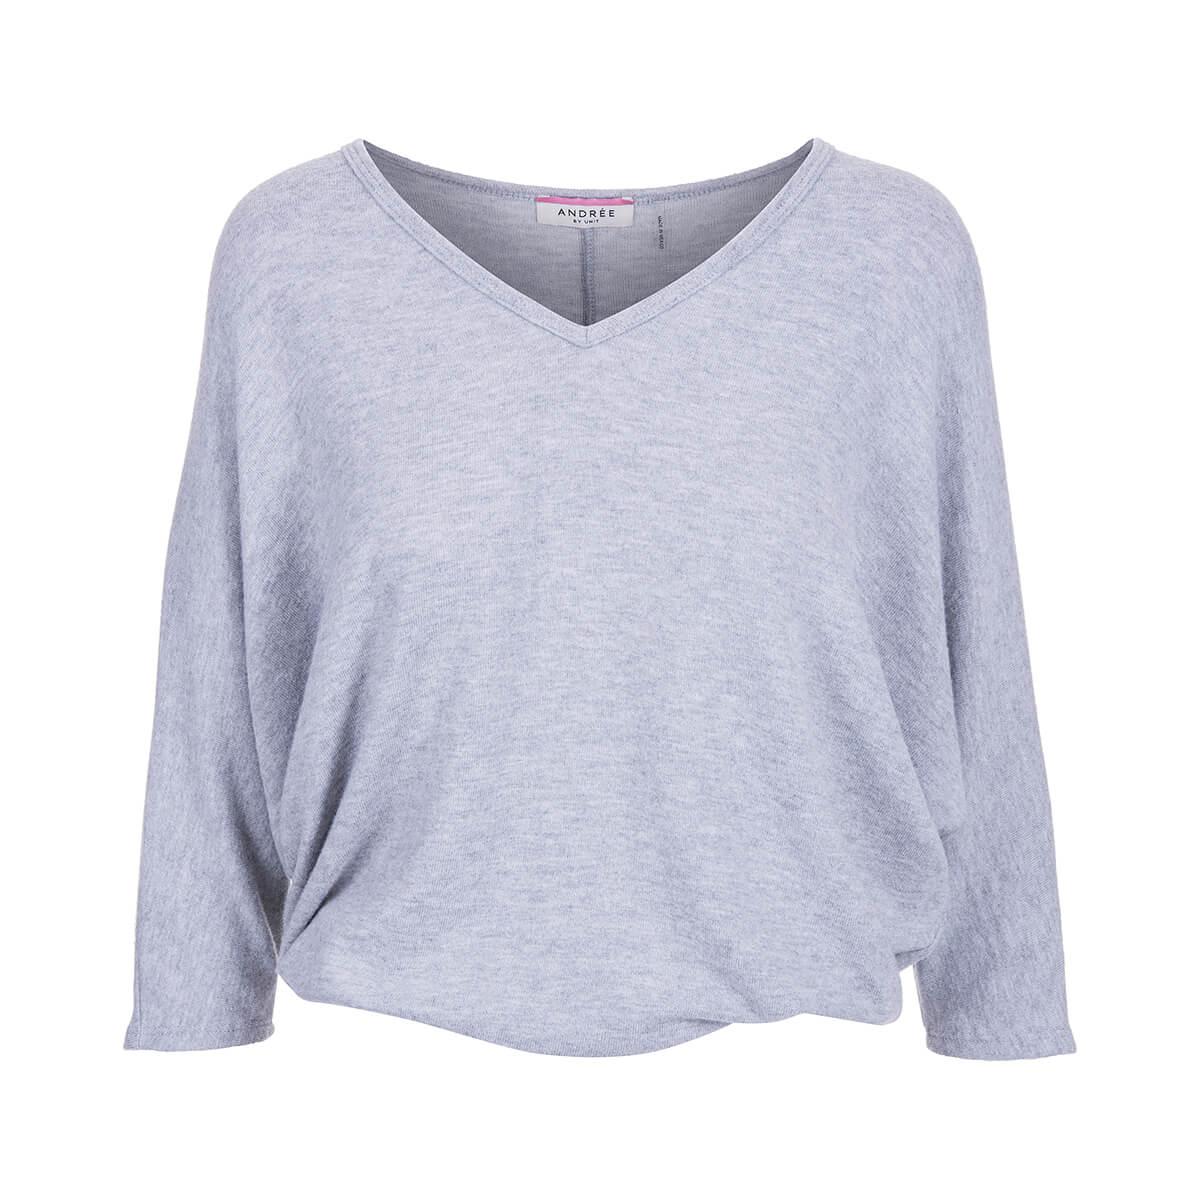  Women's V- Neck Solid 3/4 Sleeve Top